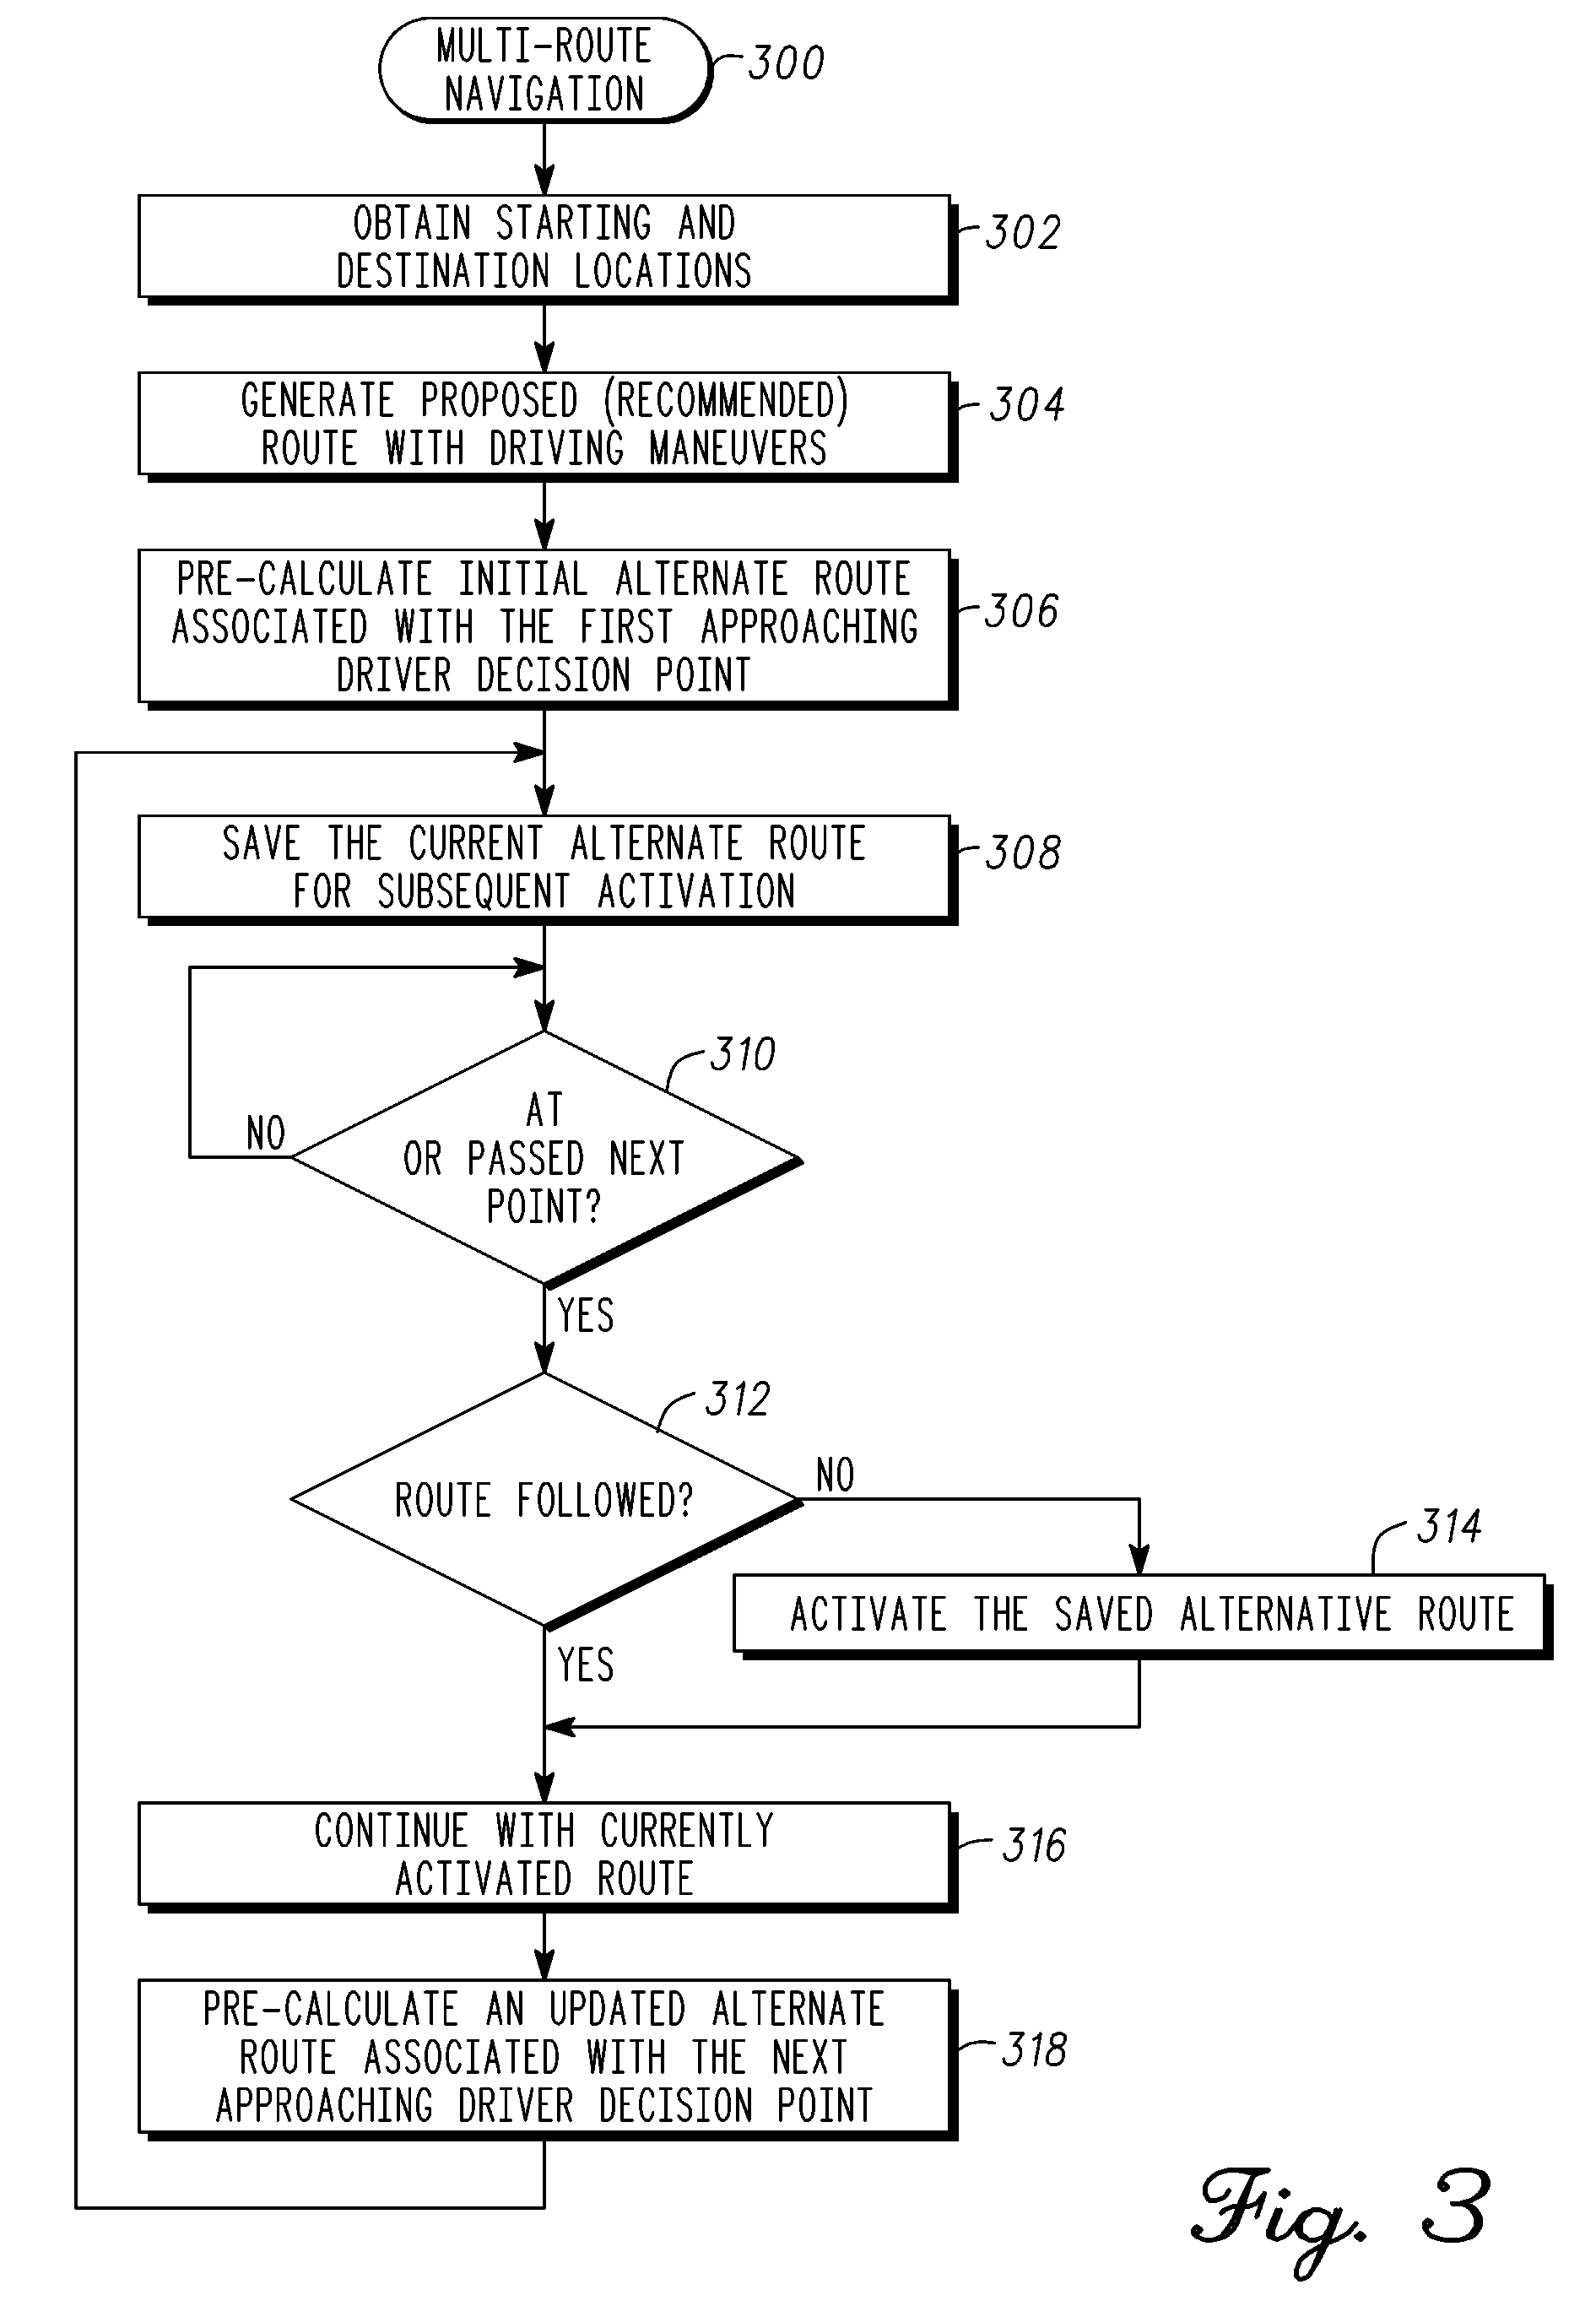 Multiple route pre-calculation and presentation for a vehicle navigation system